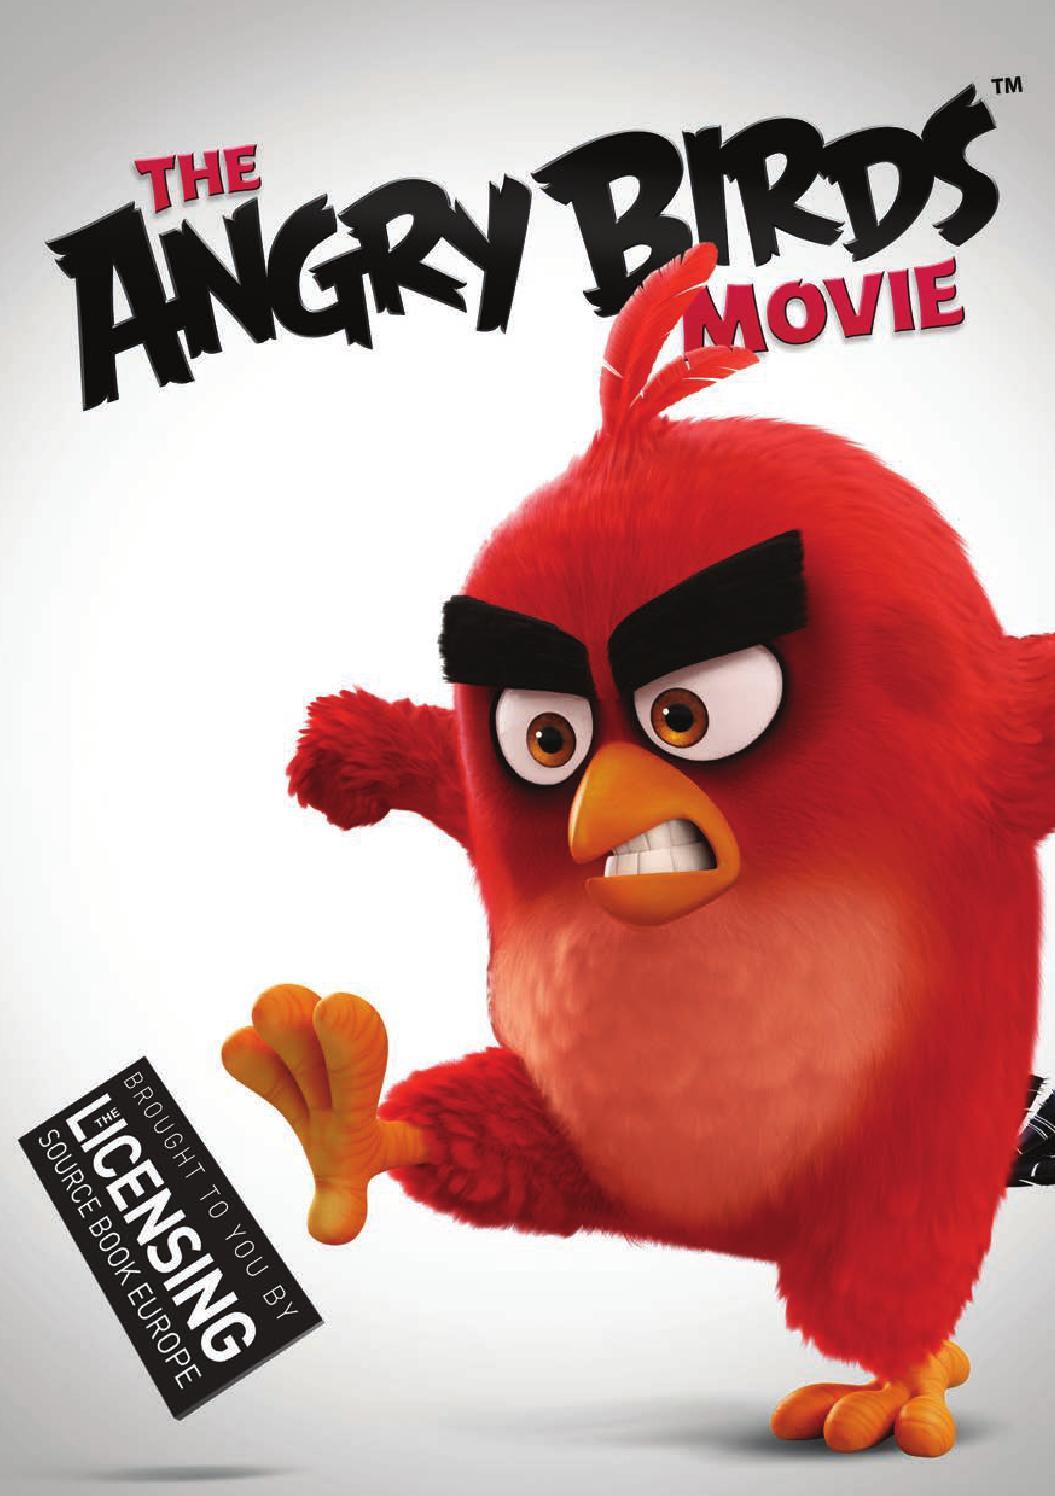 Angry Birds Movie Logo - Angry Birds Movie Supplement 2015 by Max Publishing - issuu